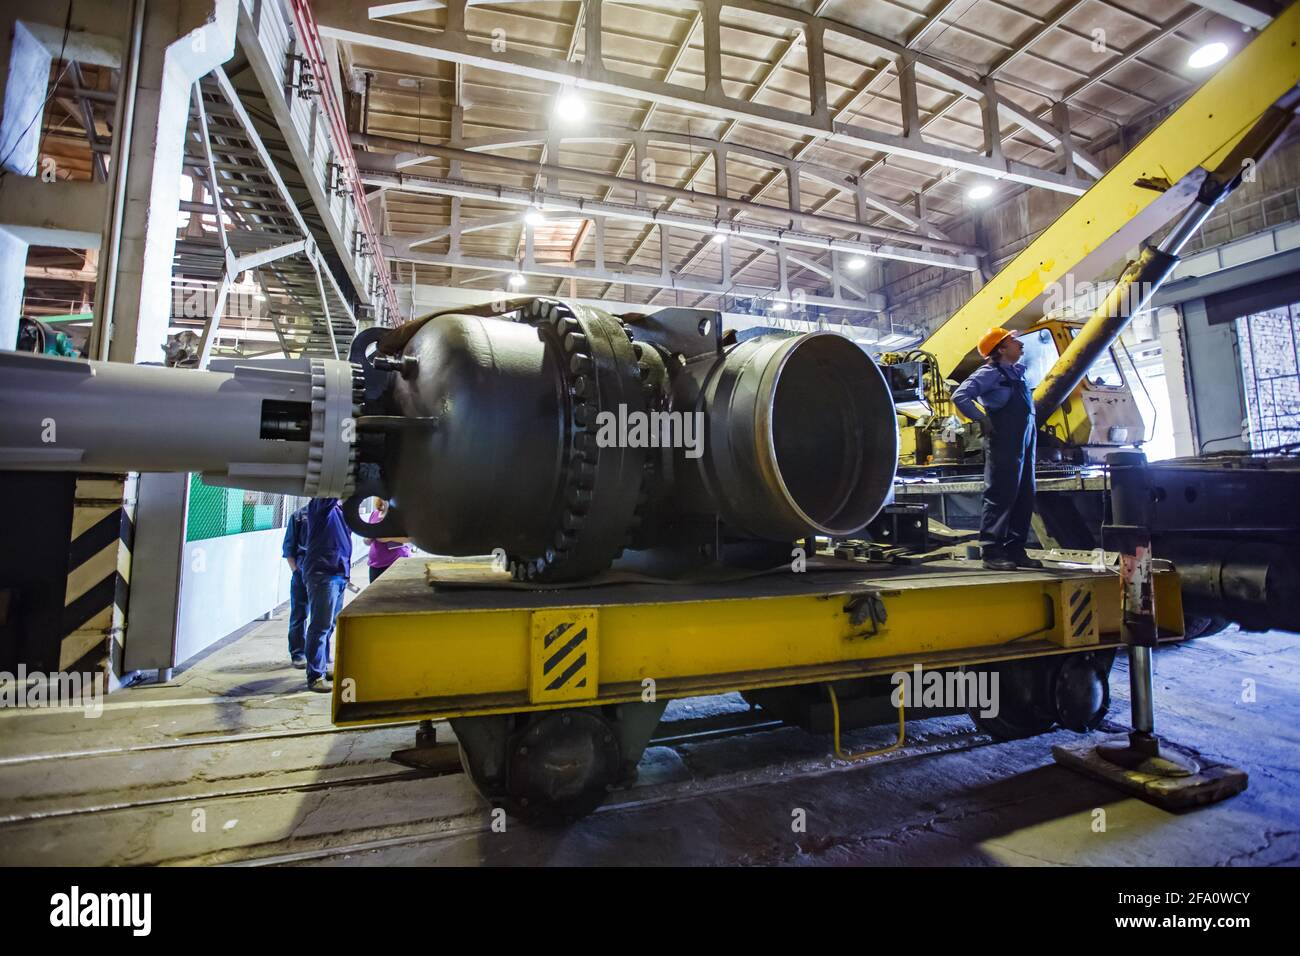 Worker lifts giant shut-off valve by mobile crane.Loading on rail platform.Oil and gas industry equipment production plant workshop.Ust-Kamenogorsk,KZ. Stock Photo